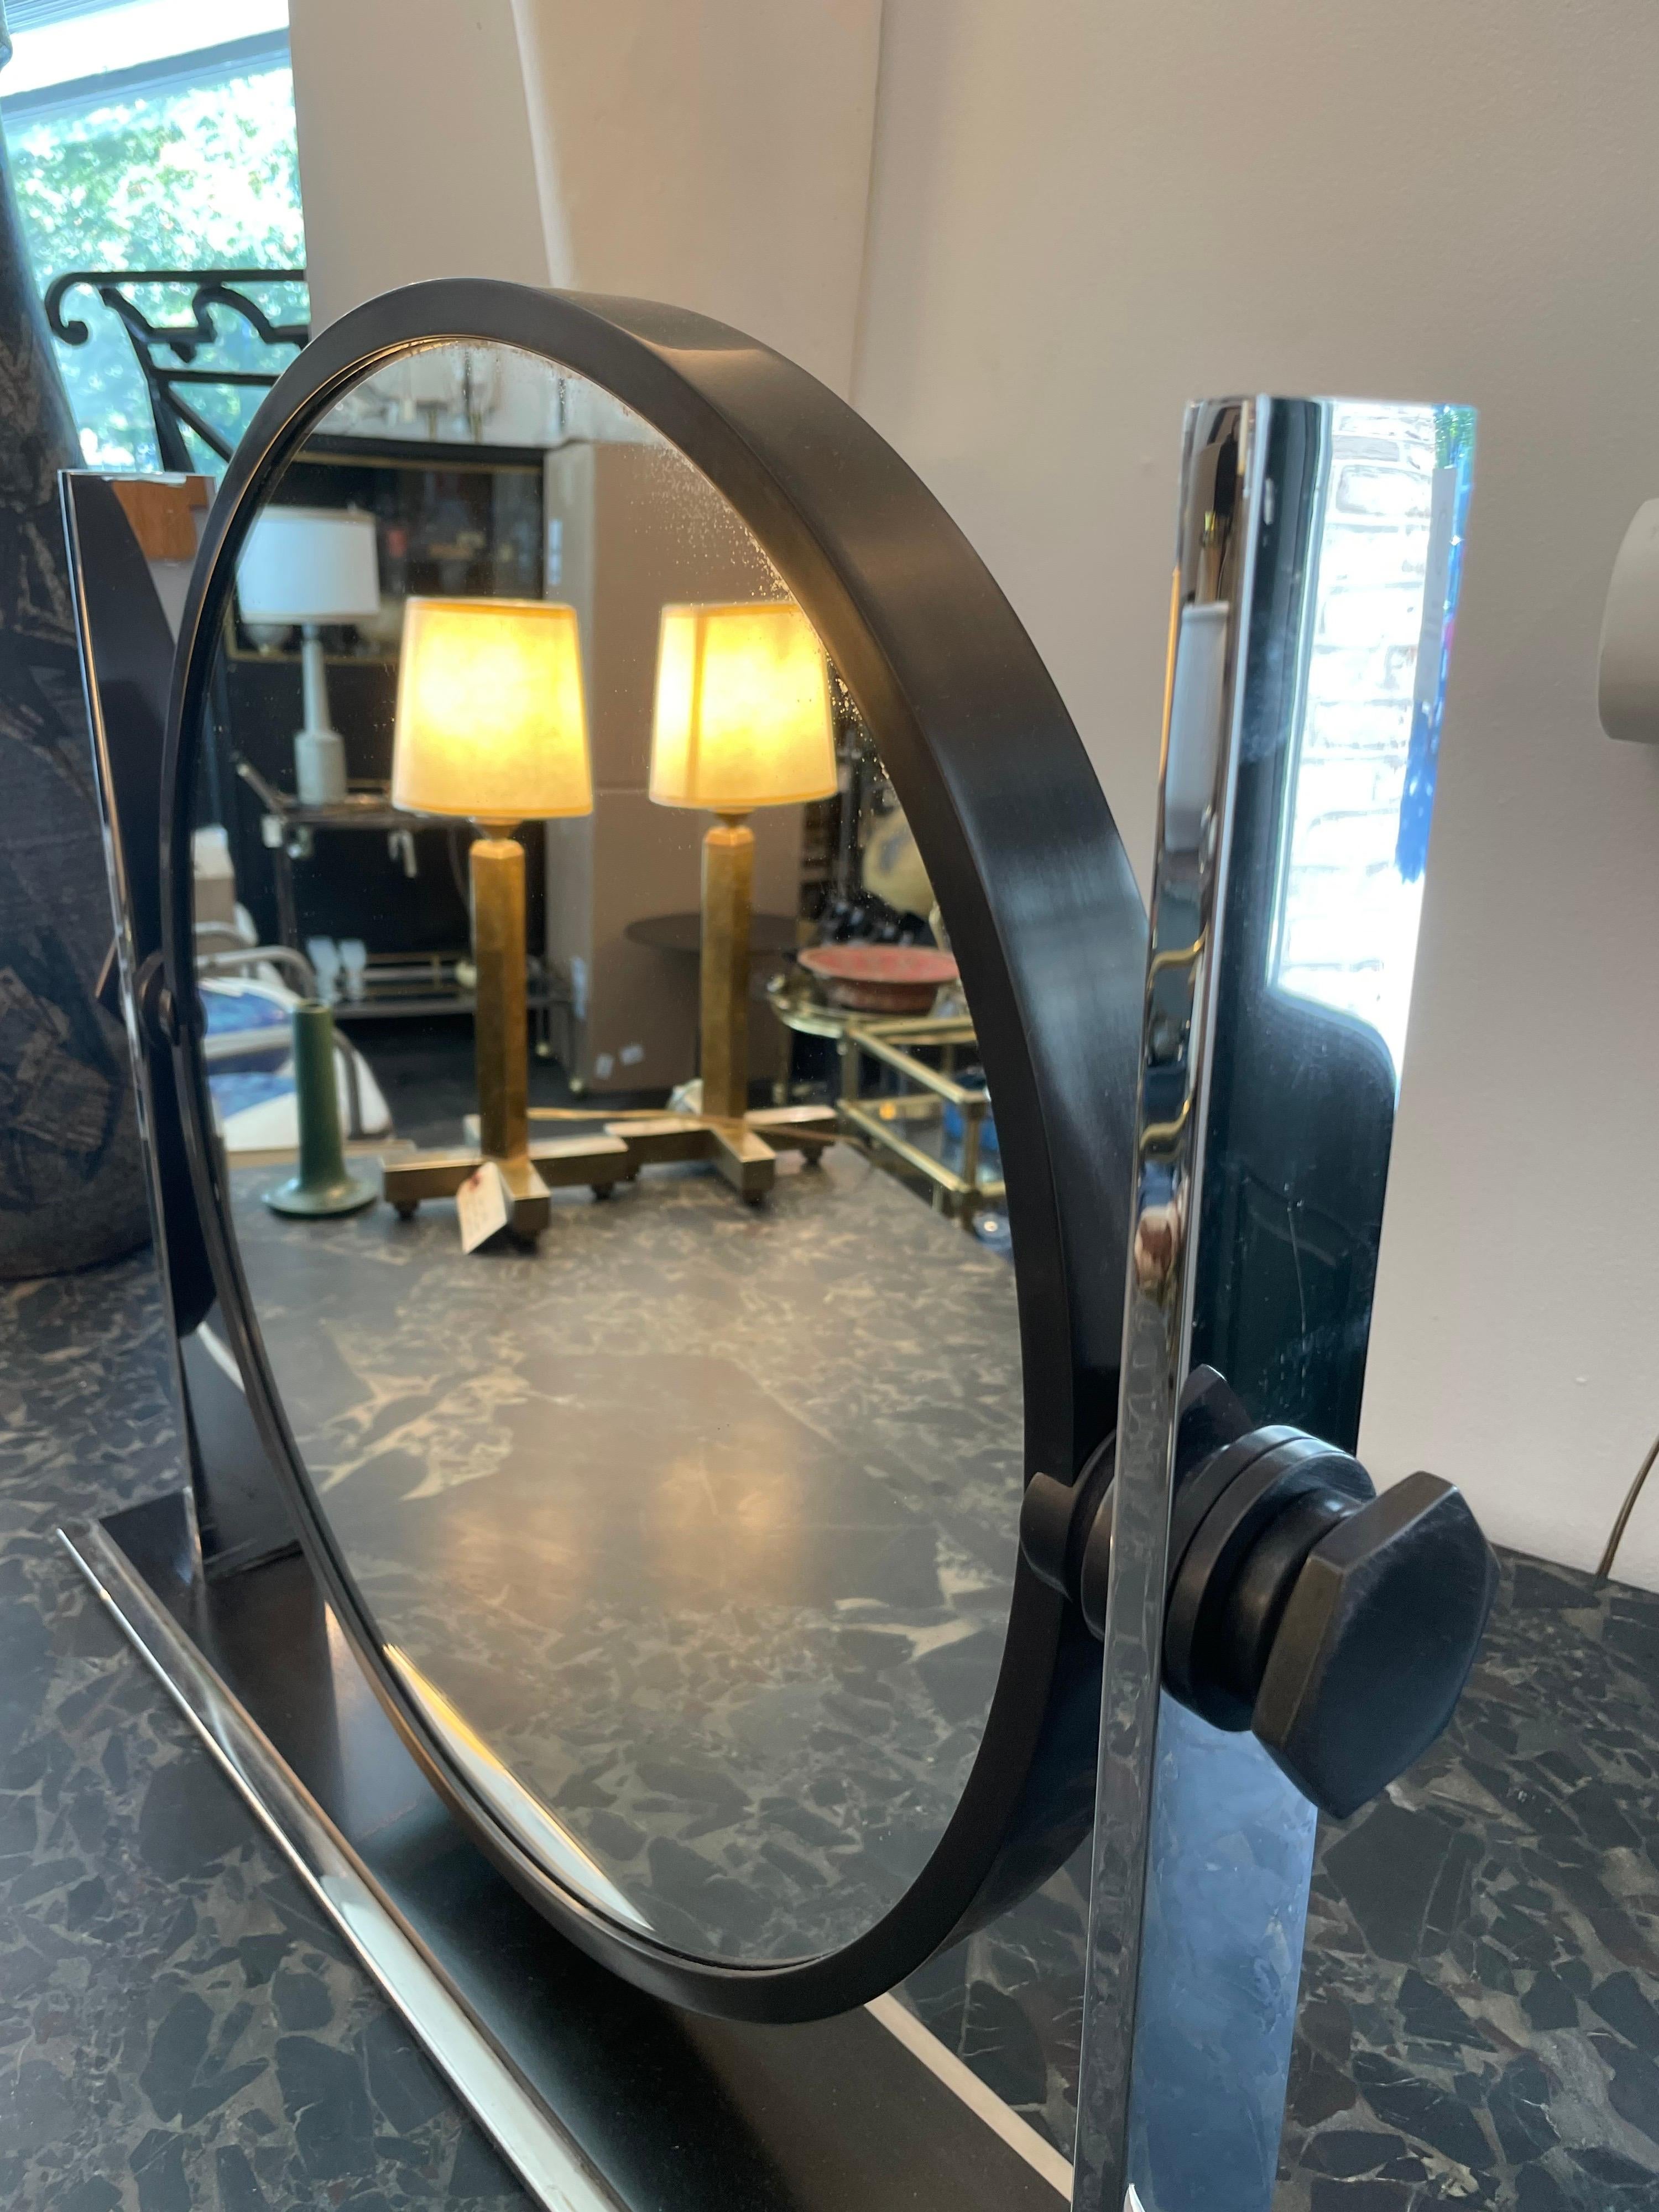 This iconic large Karl Springer Art Deco inspired vanity make-up mirror dates to the 1970s-1980s. Made from stainless steel and bronzed finish brass, there are mirrors on BOTH sides with hexagonal nut accent knobs. Note: Diameter of the mirror is